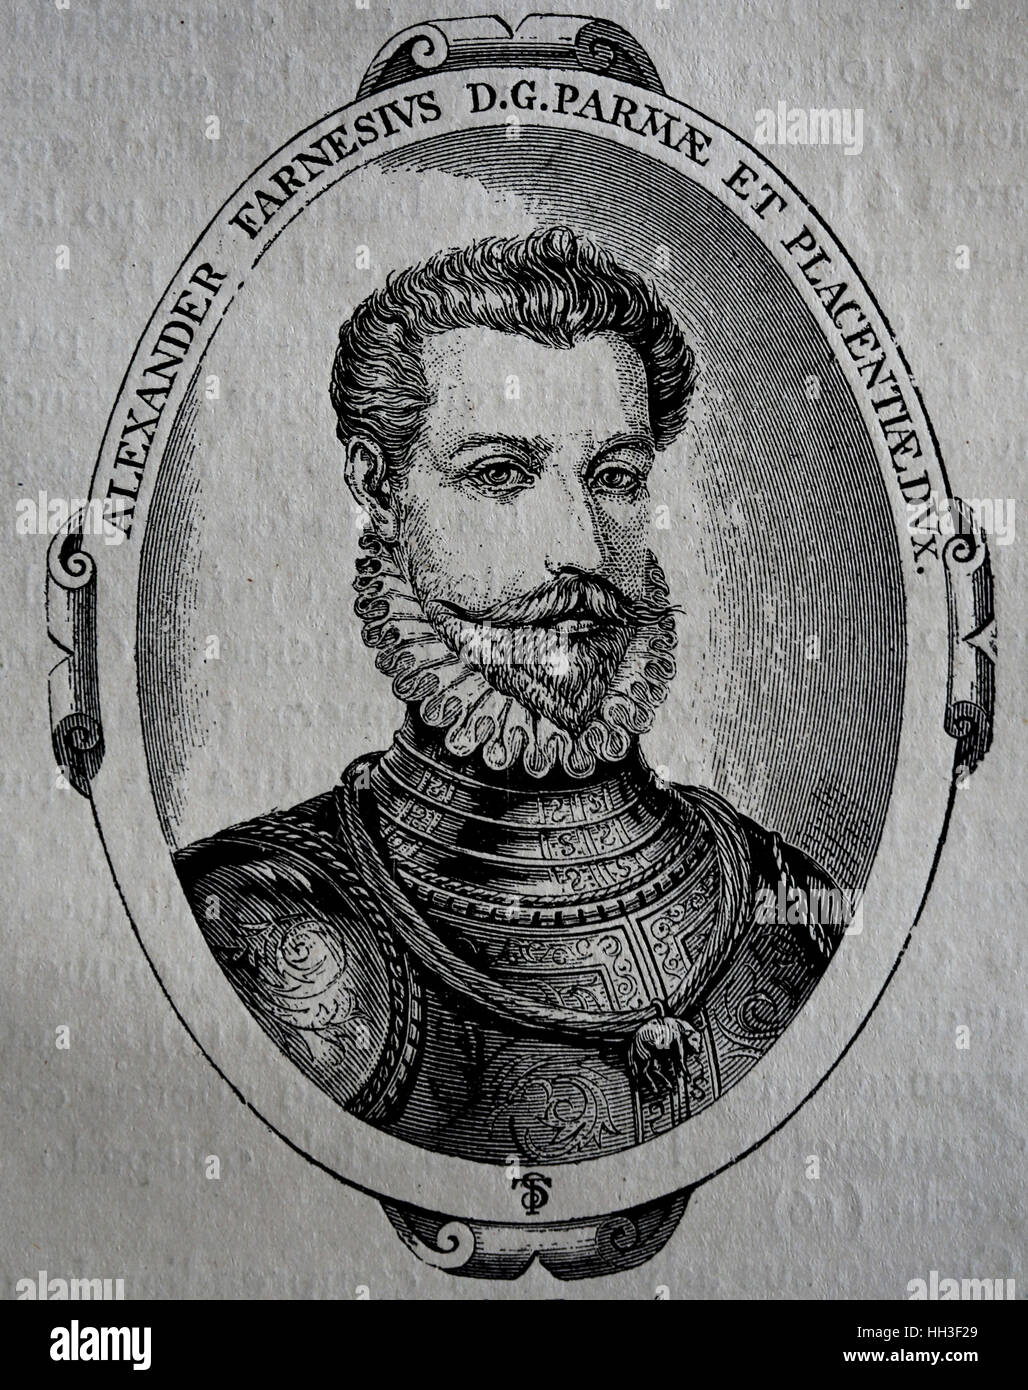 Alexander Farnese (1545-1592). Duke of Parma. Governor of the Spanish Netherlands, 1578-1592. Portrait. Engraving, 1884. Stock Photo